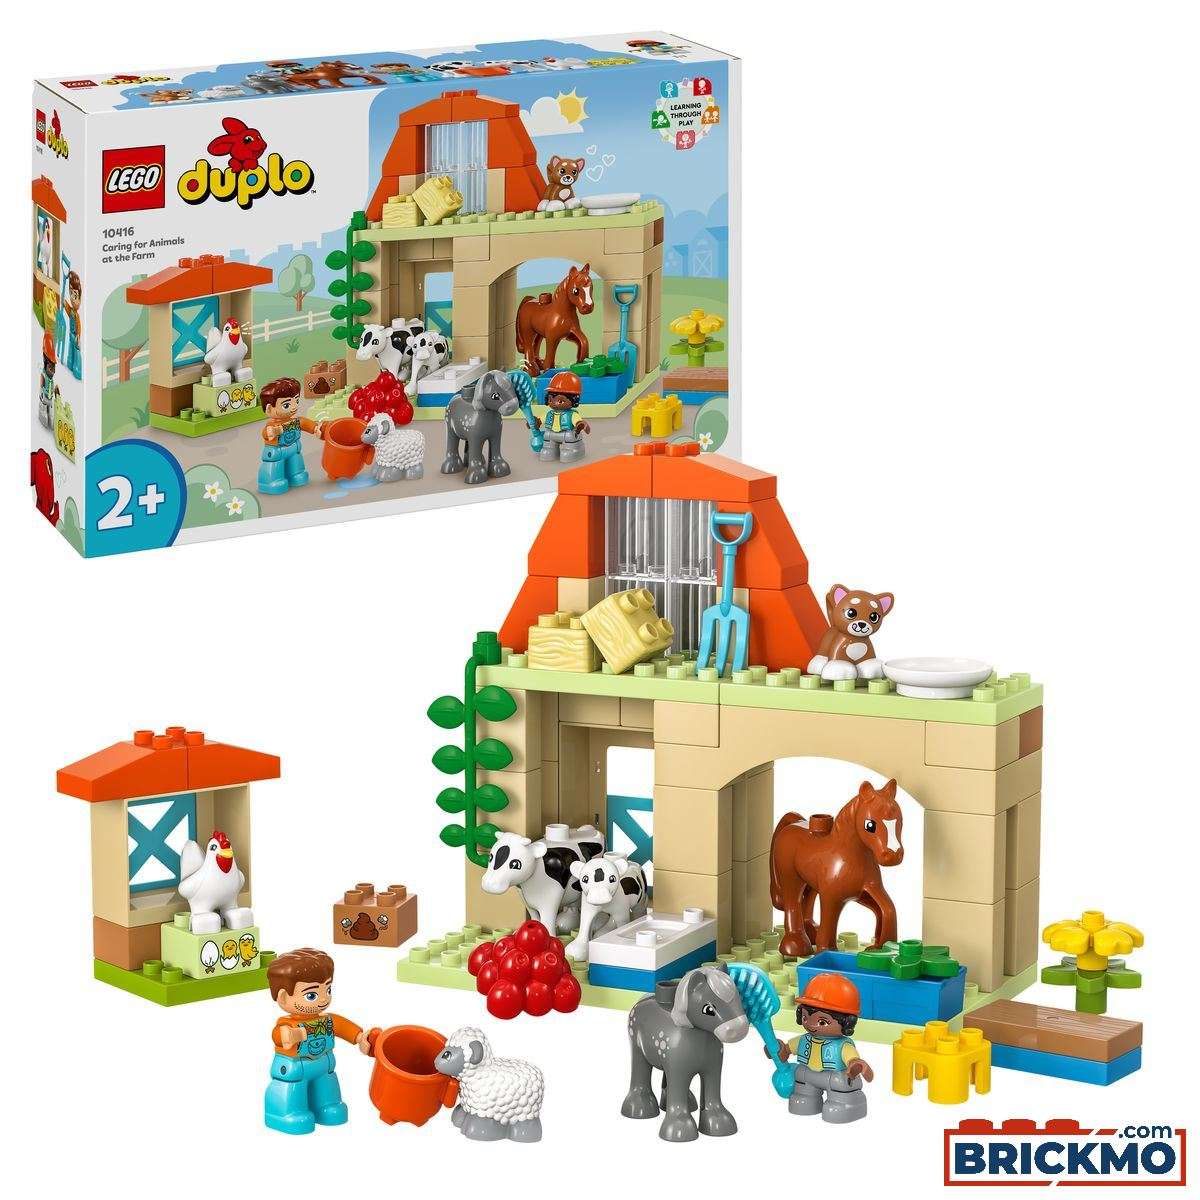 LEGO Duplo 10416 Caring for Animals at the Farm 10416